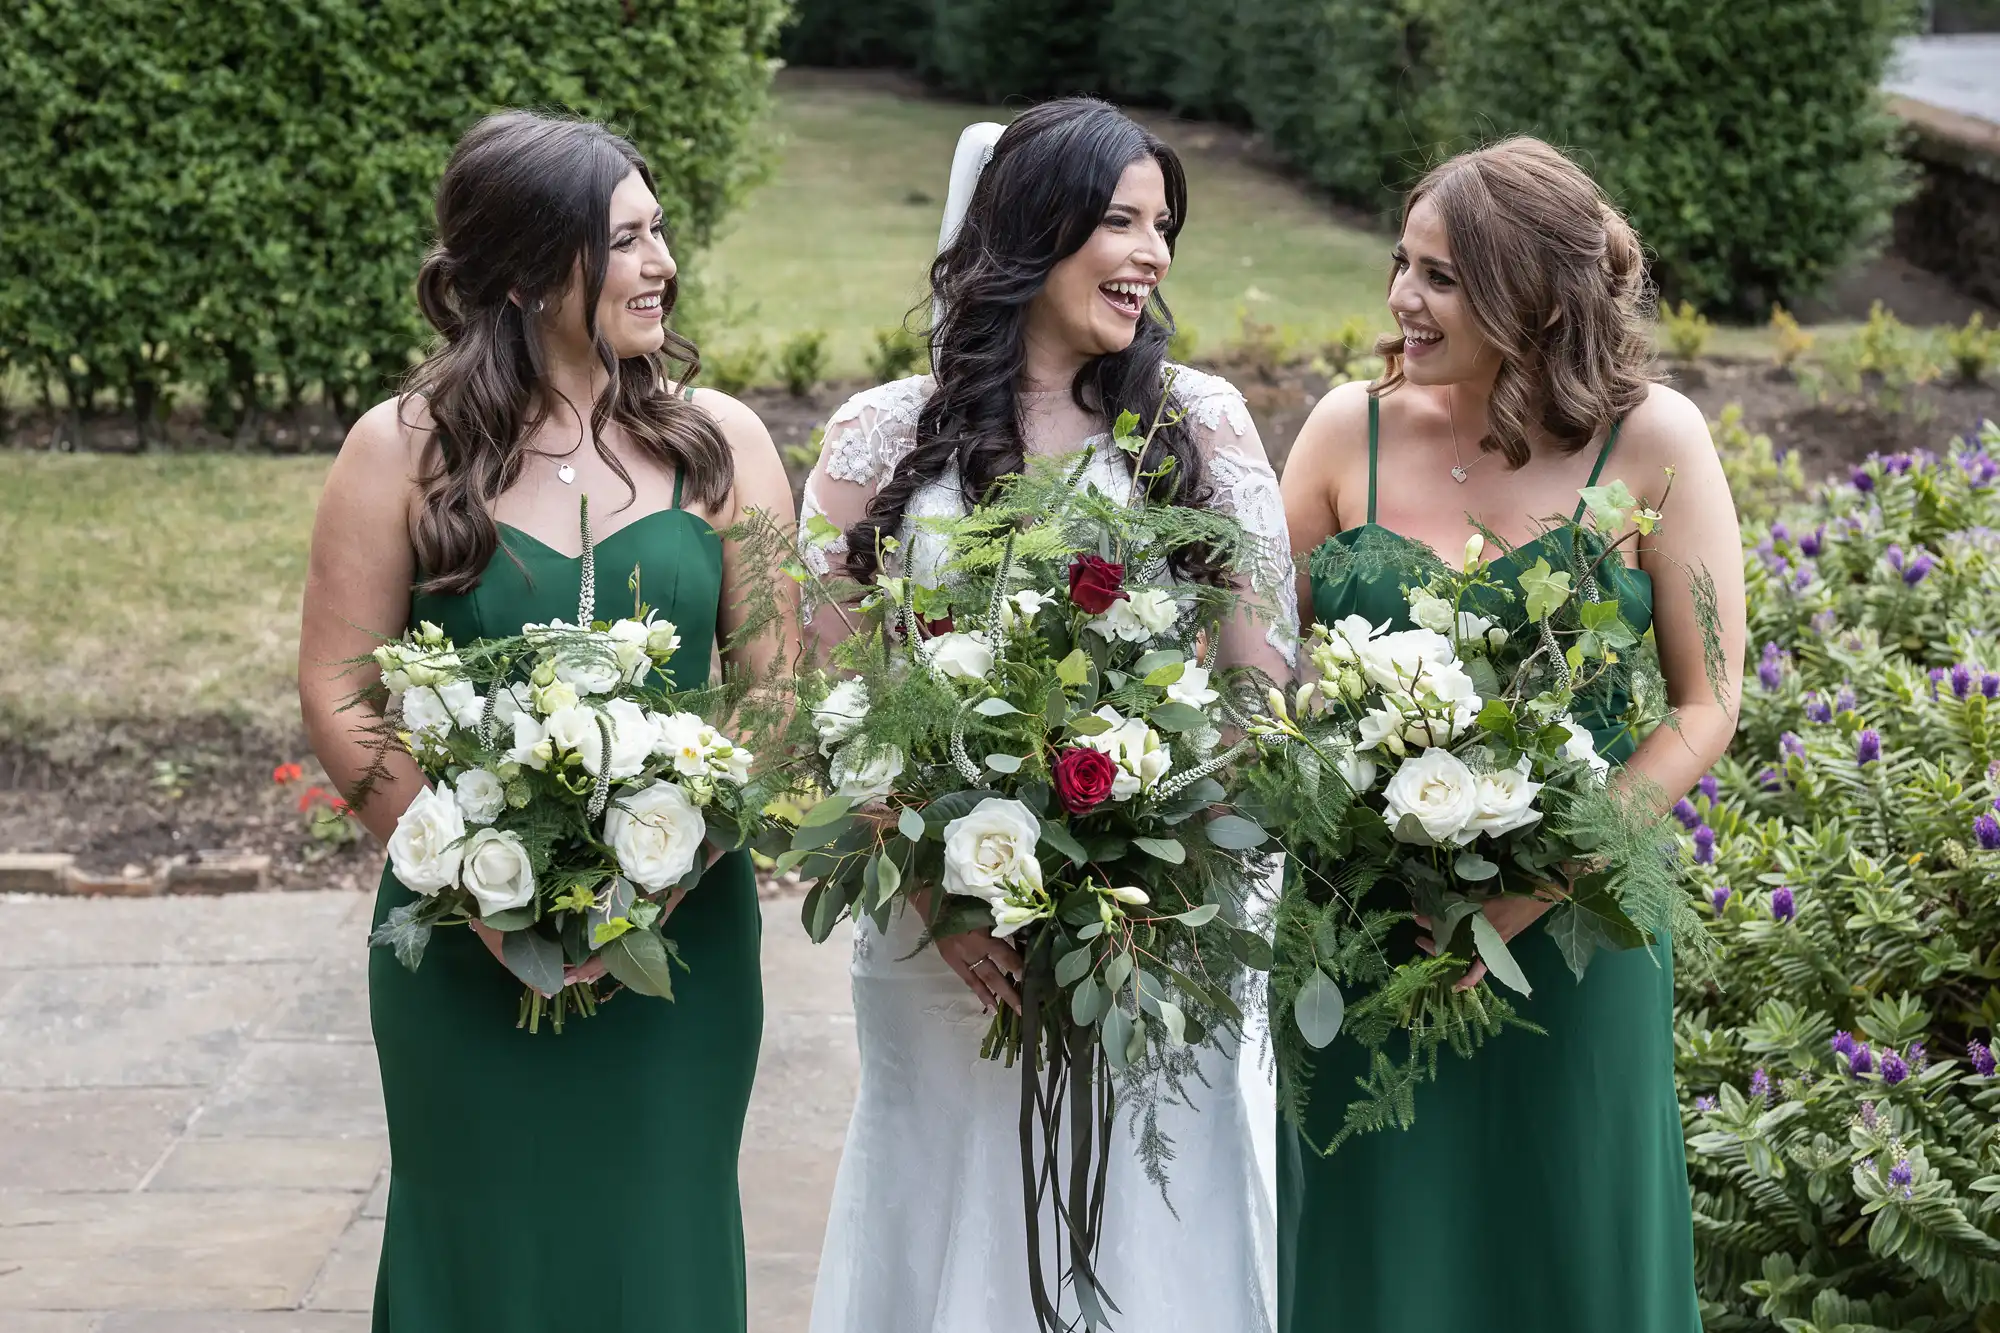 A bride in a white dress and two bridesmaids in green dresses, all holding floral bouquets, smiling and chatting outdoors.